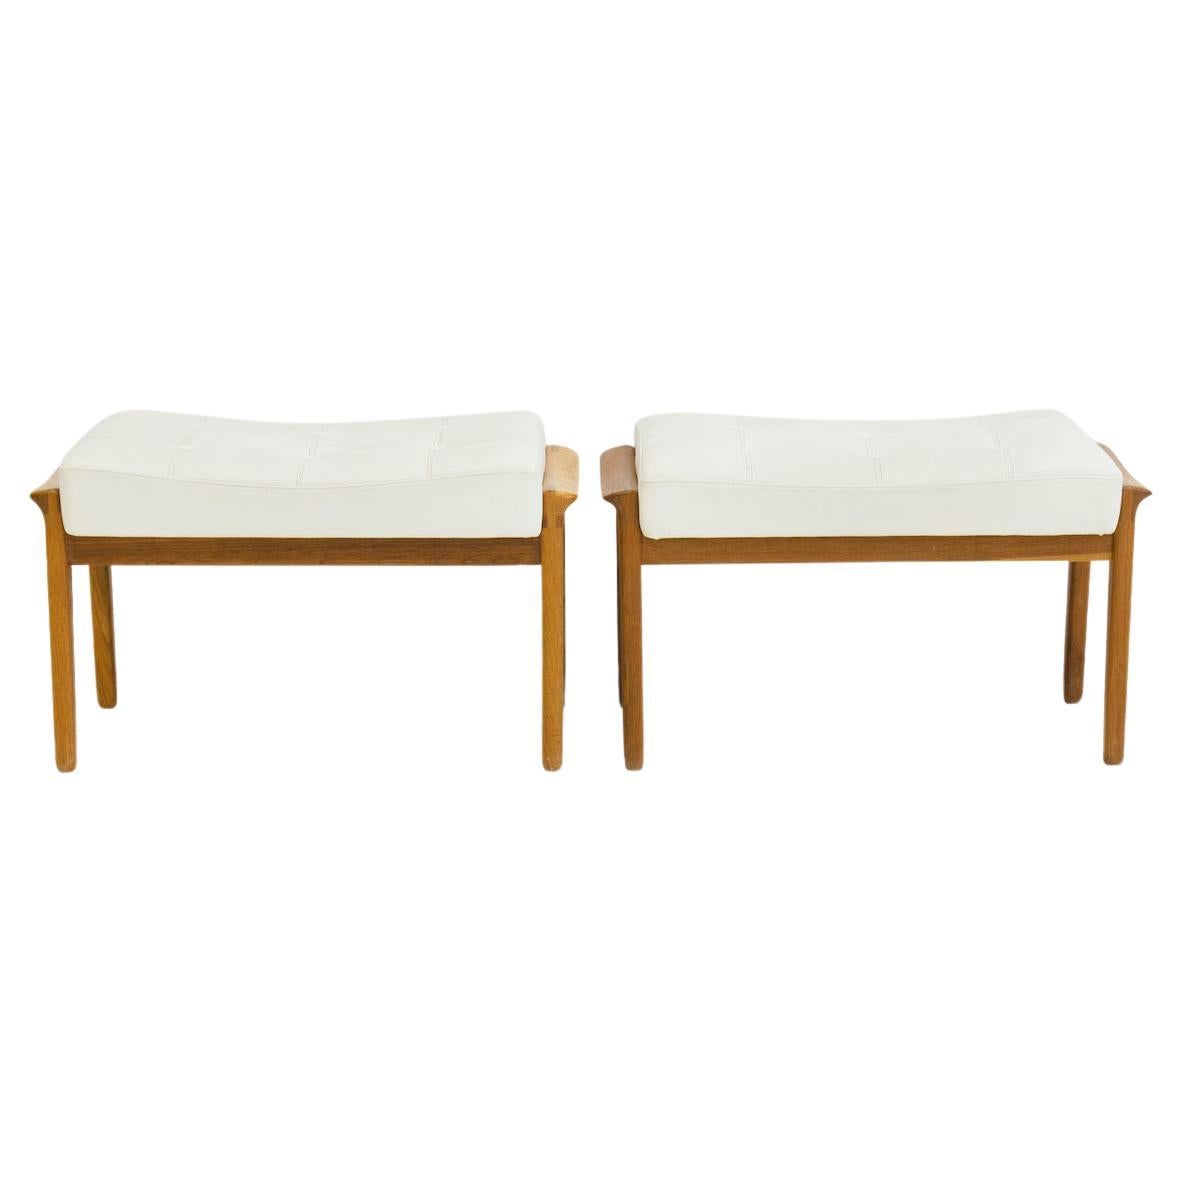 Pair of Teak and White Leather Upholstered Ottomans